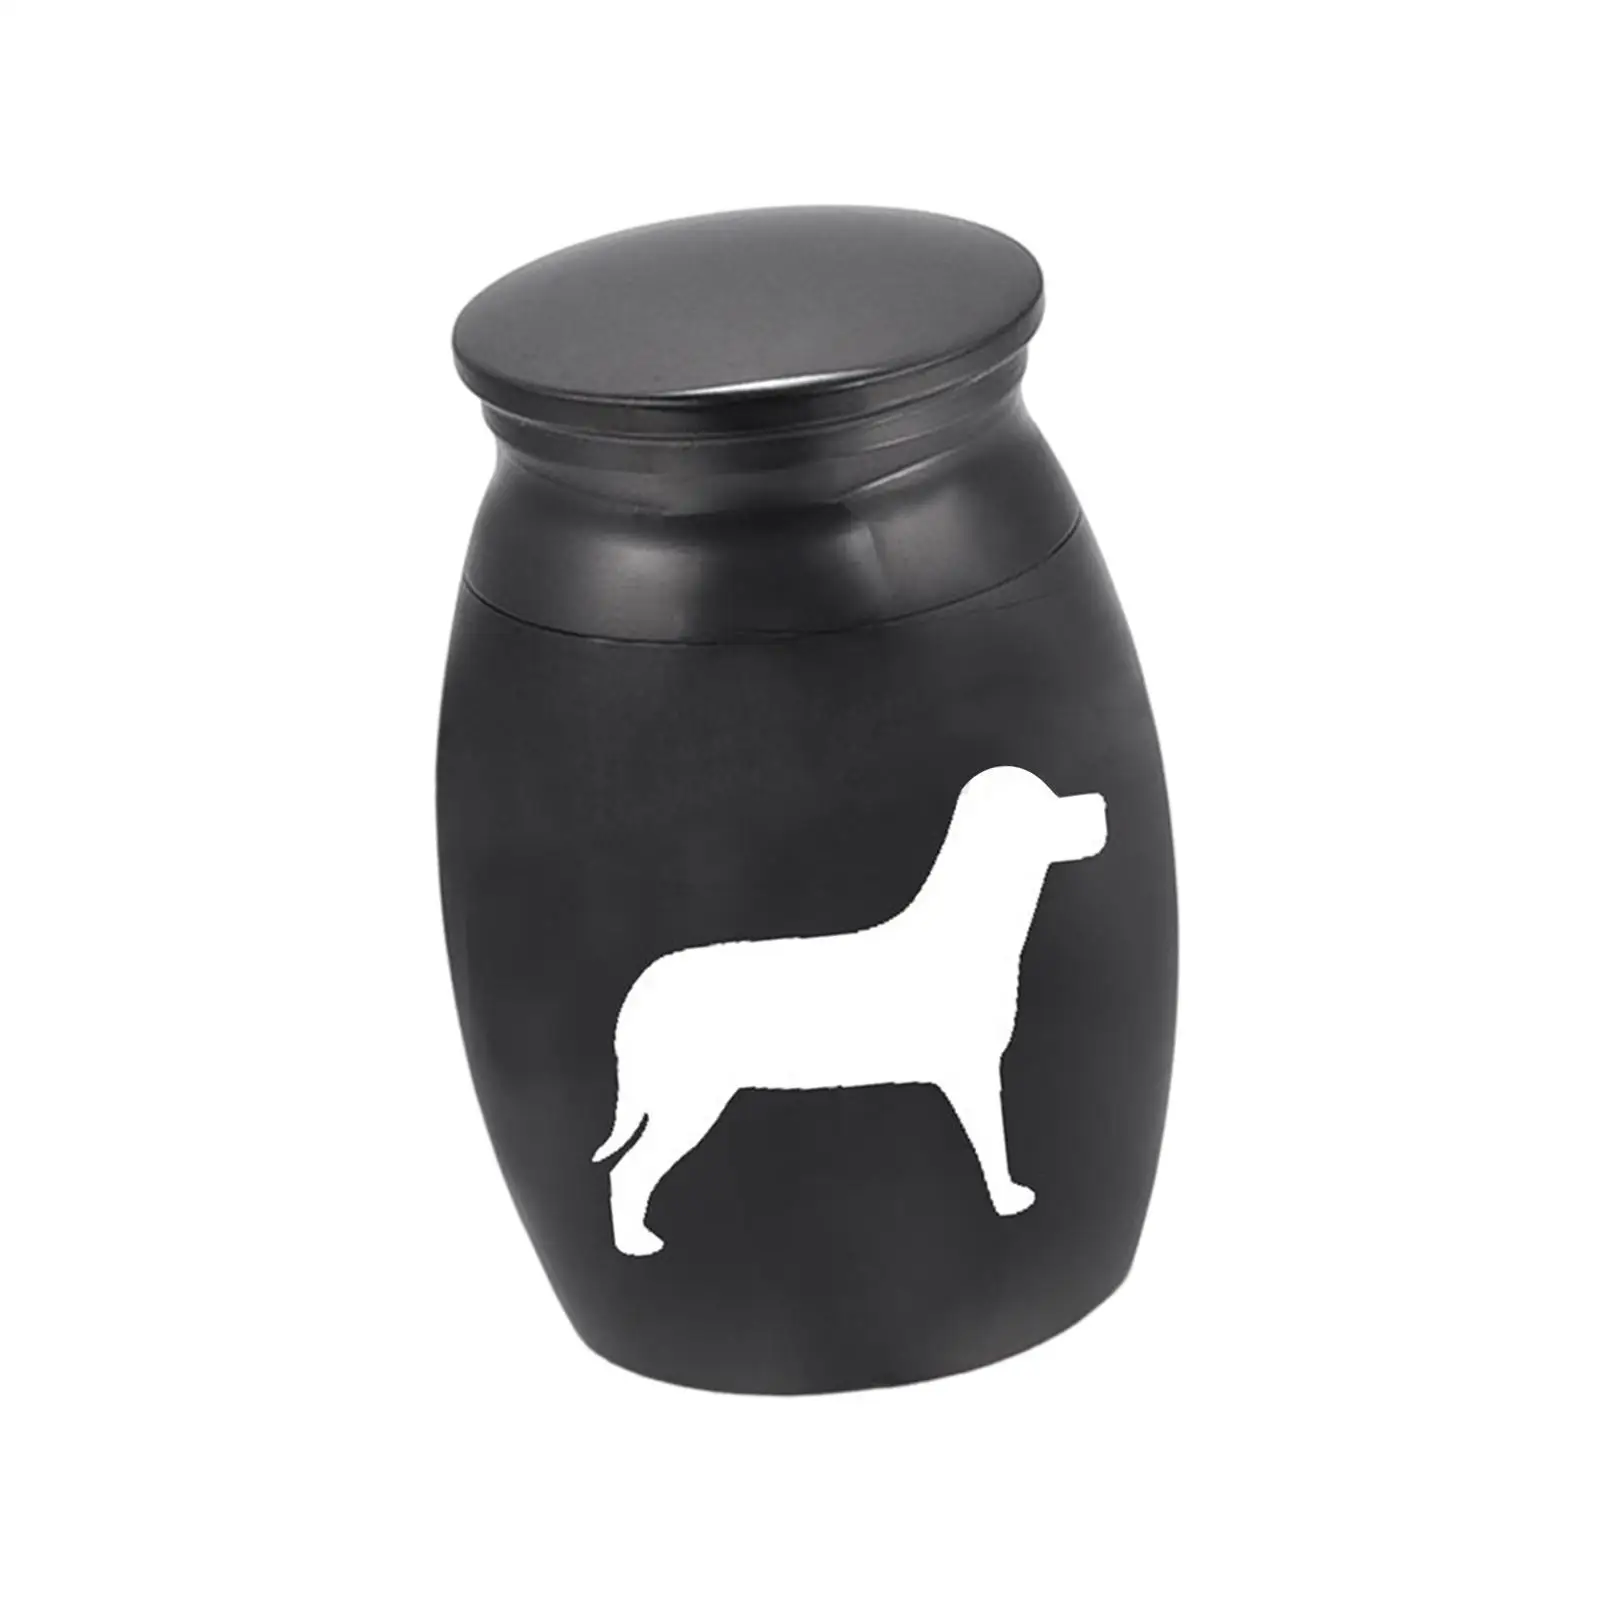 Pet Urn for Dogs Cats Ash Easy to Carry Remembrance Fittings Lightweight Funeral Memorial Keepsake Container Cinerary Casket